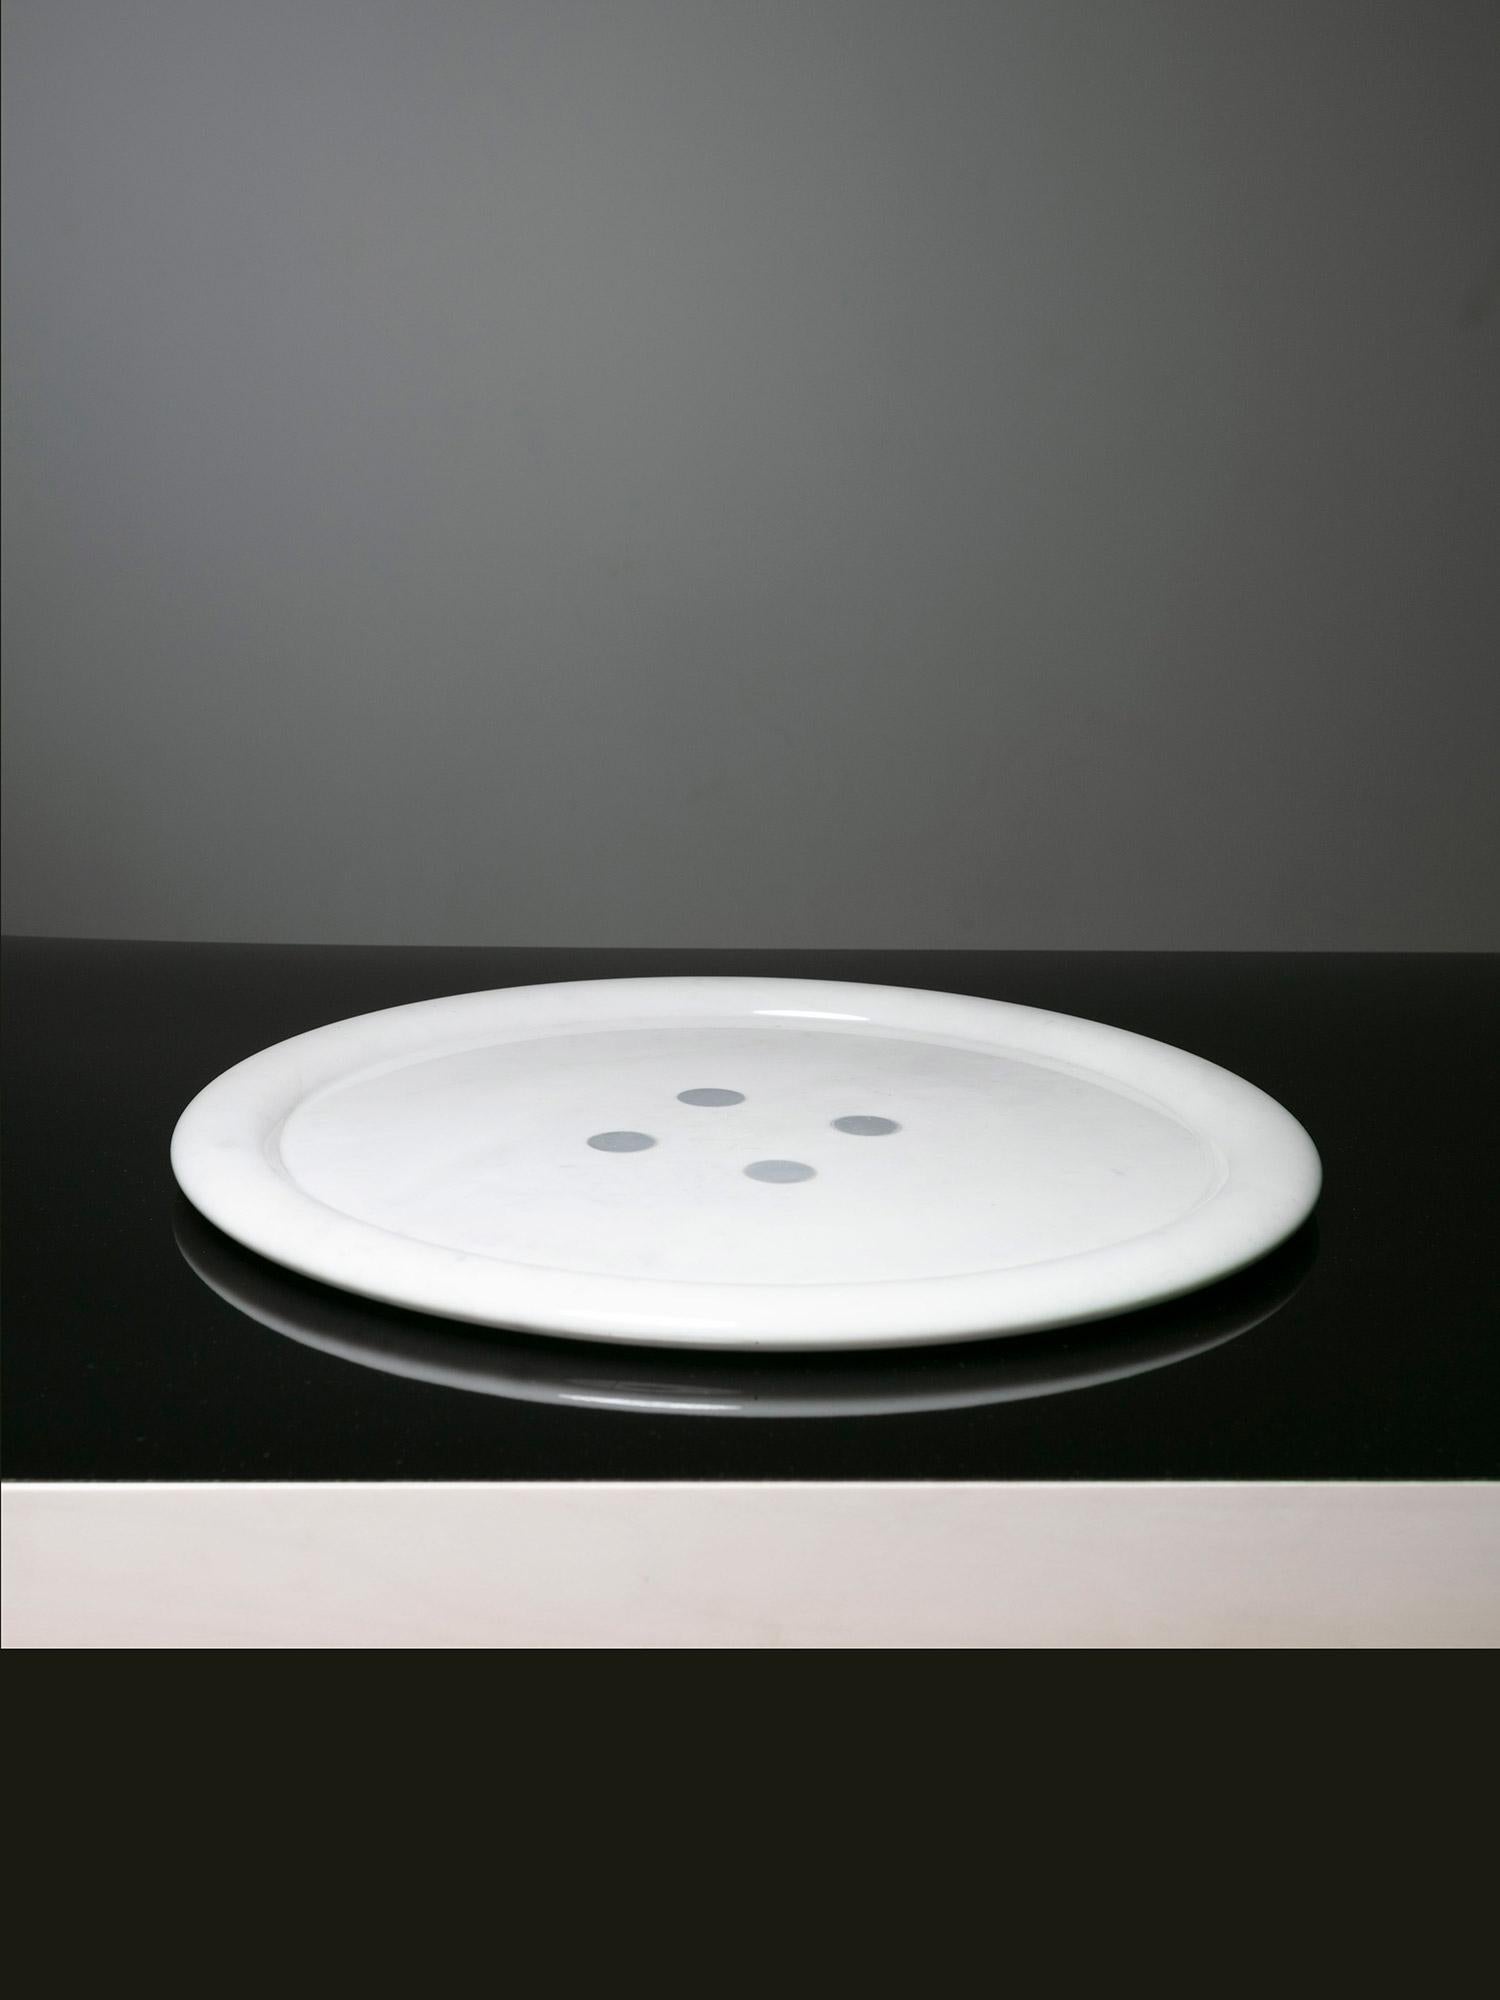 Marble centerpiece by Giulio Lazzotti for Casigliani.
A large button shaped white marble piece with gray spots.
